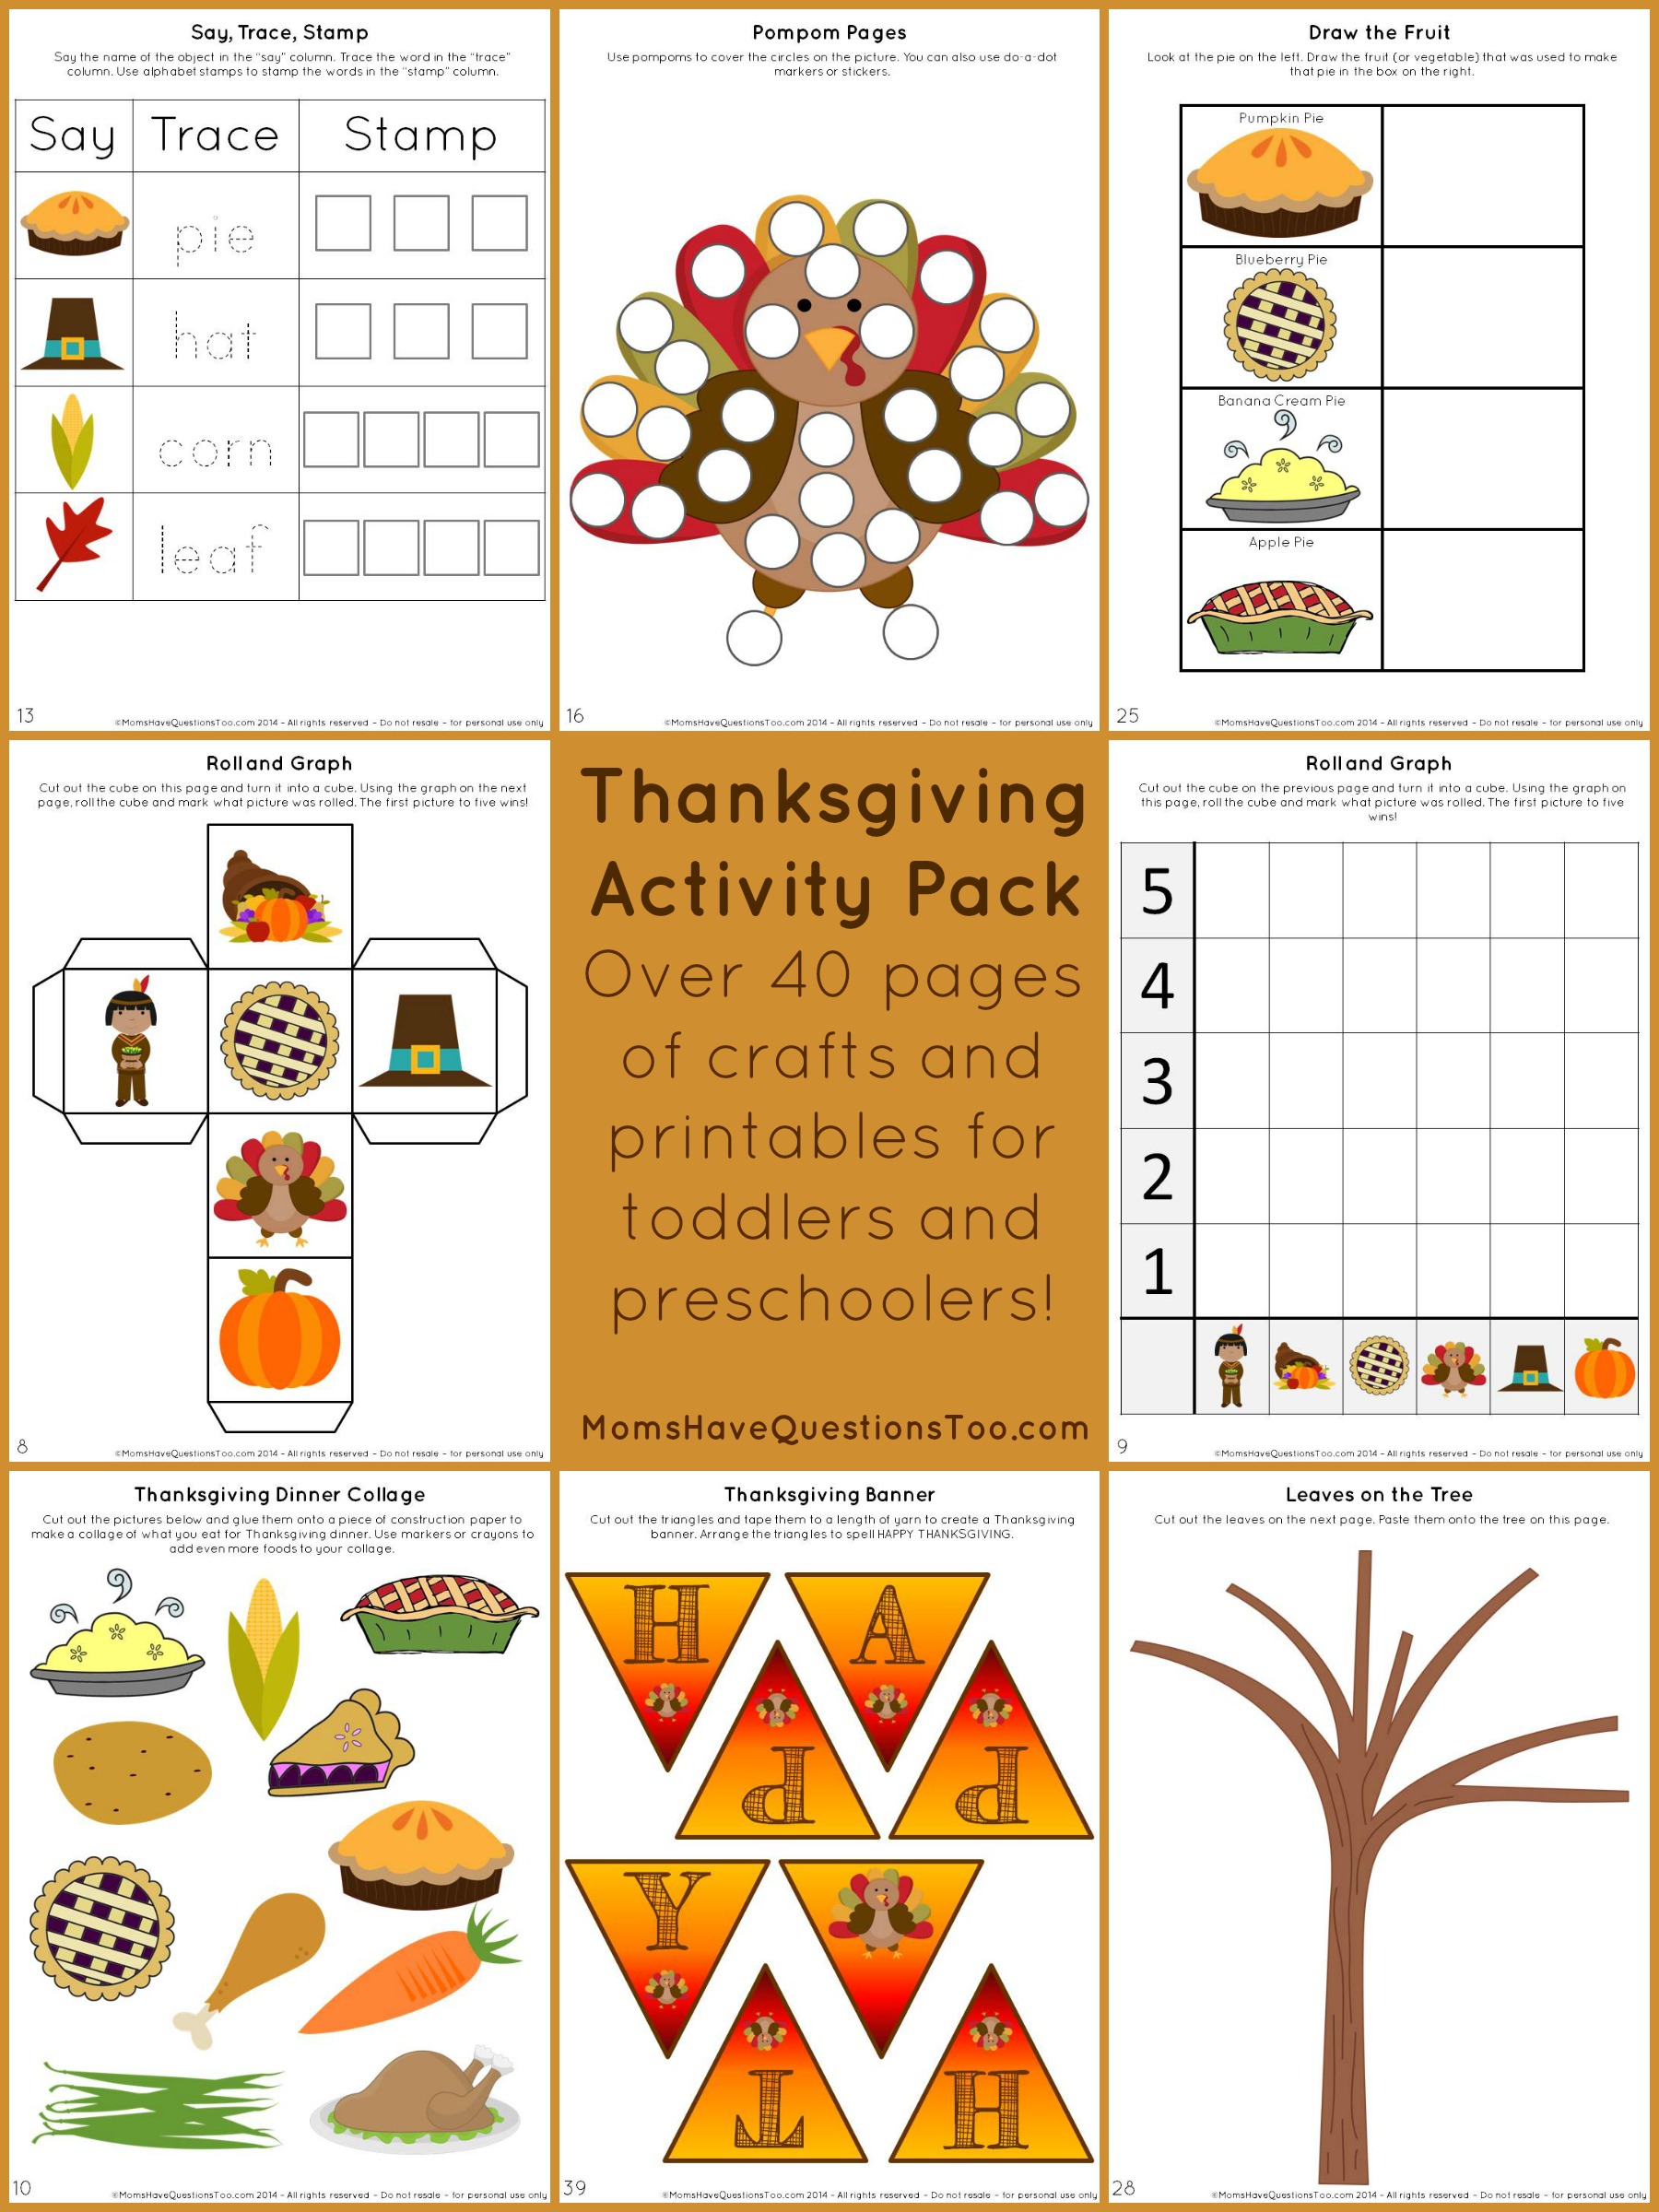 printable-thanksgiving-activities-for-preschool-tooth-the-movie